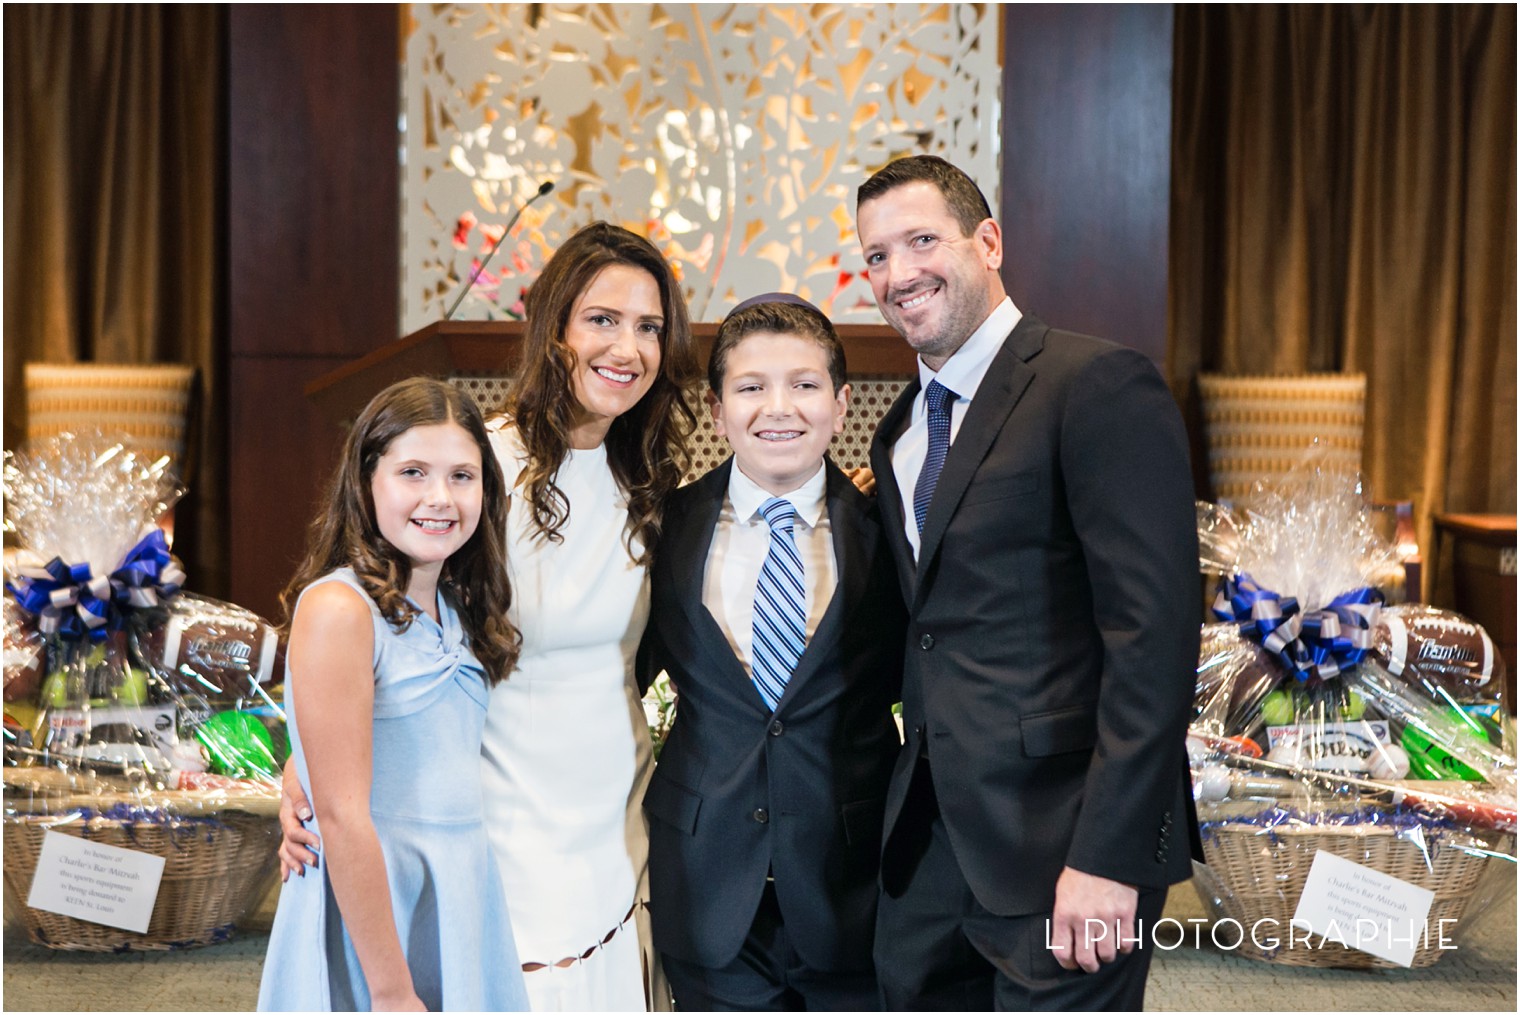 L Photographie Saint Louis bar mitzvah photography Simcha's Events Temple Israel Meadowbrook Country Club_0003.jpg